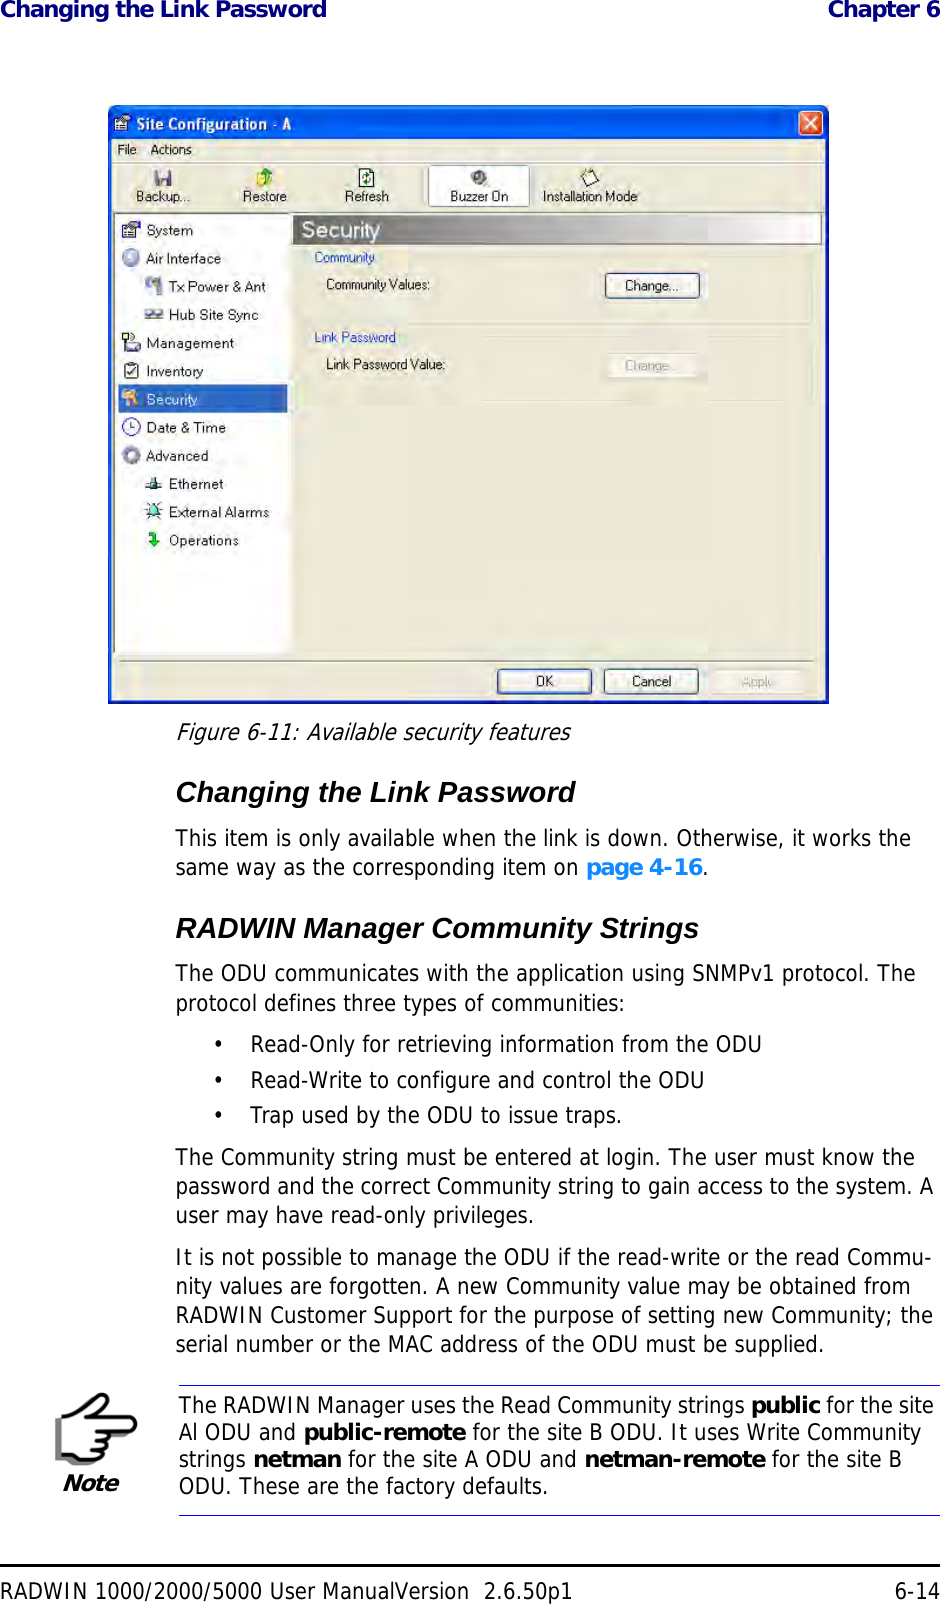 Changing the Link Password  Chapter 6RADWIN 1000/2000/5000 User ManualVersion  2.6.50p1 6-14 Figure 6-11: Available security featuresChanging the Link PasswordThis item is only available when the link is down. Otherwise, it works the same way as the corresponding item on page 4-16.RADWIN Manager Community StringsThe ODU communicates with the application using SNMPv1 protocol. The protocol defines three types of communities:• Read-Only for retrieving information from the ODU• Read-Write to configure and control the ODU• Trap used by the ODU to issue traps.The Community string must be entered at login. The user must know the password and the correct Community string to gain access to the system. A user may have read-only privileges.It is not possible to manage the ODU if the read-write or the read Commu-nity values are forgotten. A new Community value may be obtained from RADWIN Customer Support for the purpose of setting new Community; the serial number or the MAC address of the ODU must be supplied.NoteThe RADWIN Manager uses the Read Community strings public for the site Al ODU and public-remote for the site B ODU. It uses Write Community strings netman for the site A ODU and netman-remote for the site B ODU. These are the factory defaults.